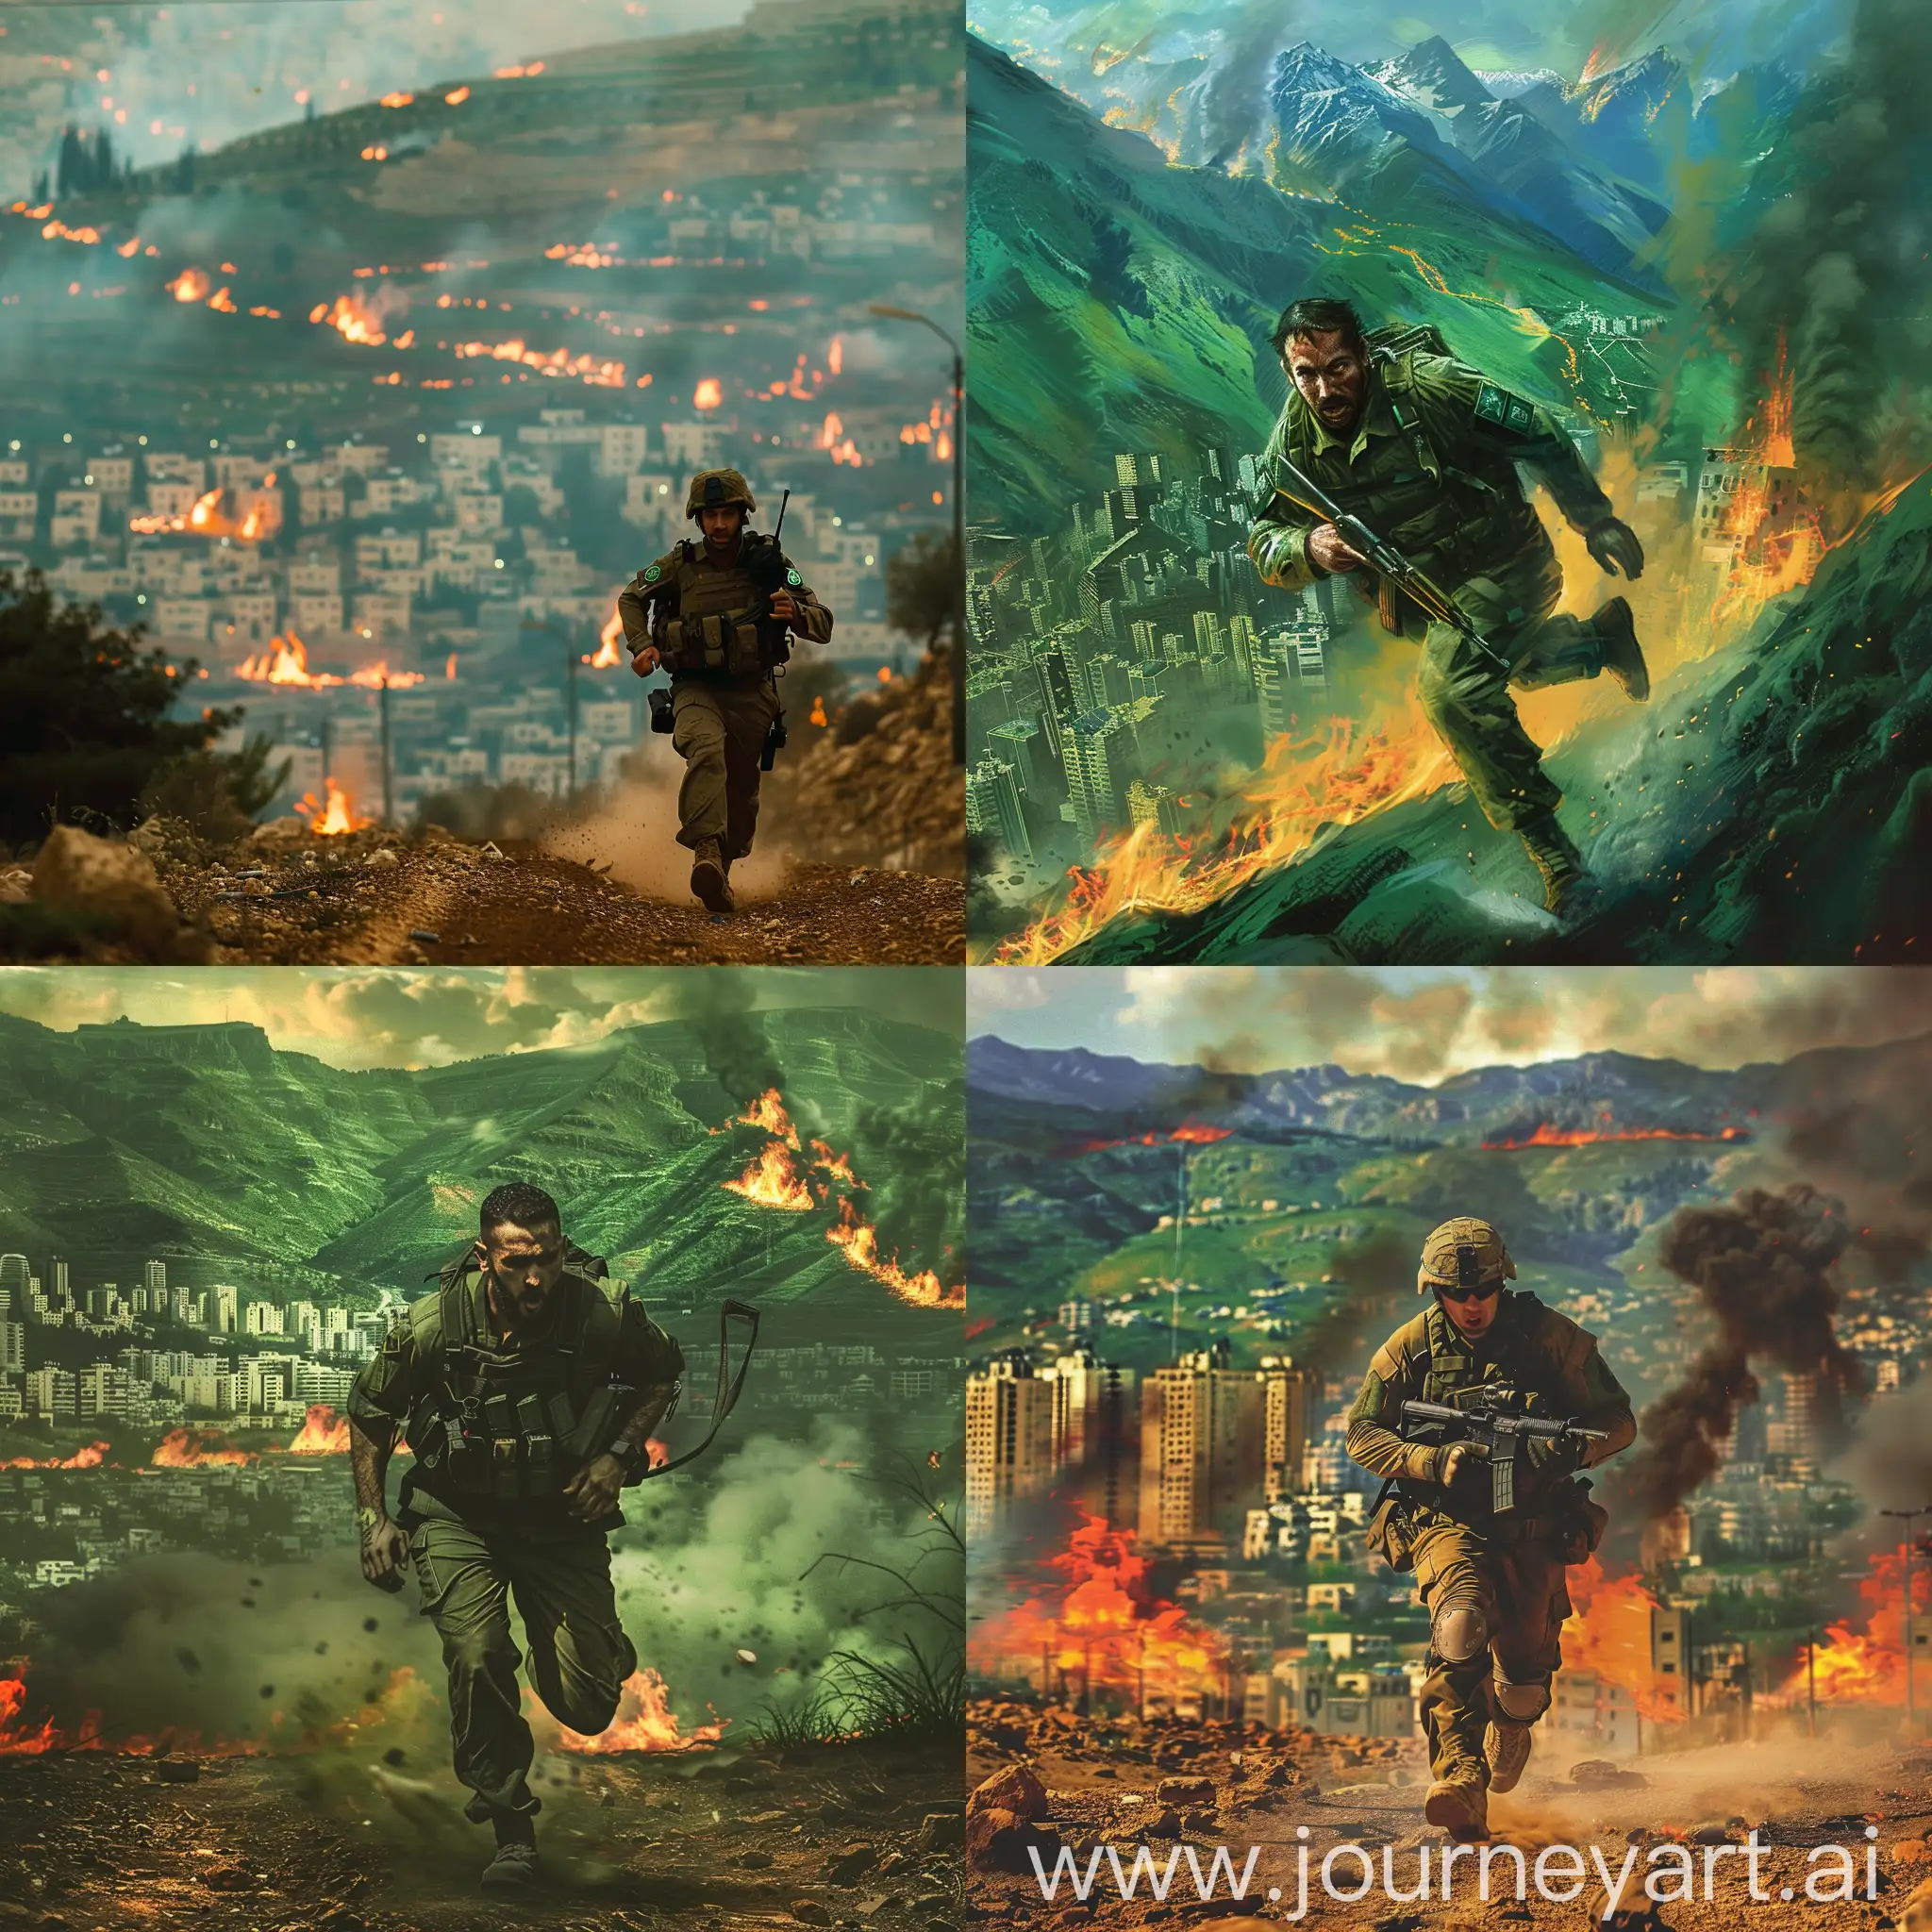 An Israeli soldier flees and behind him is a city with burning green mountains